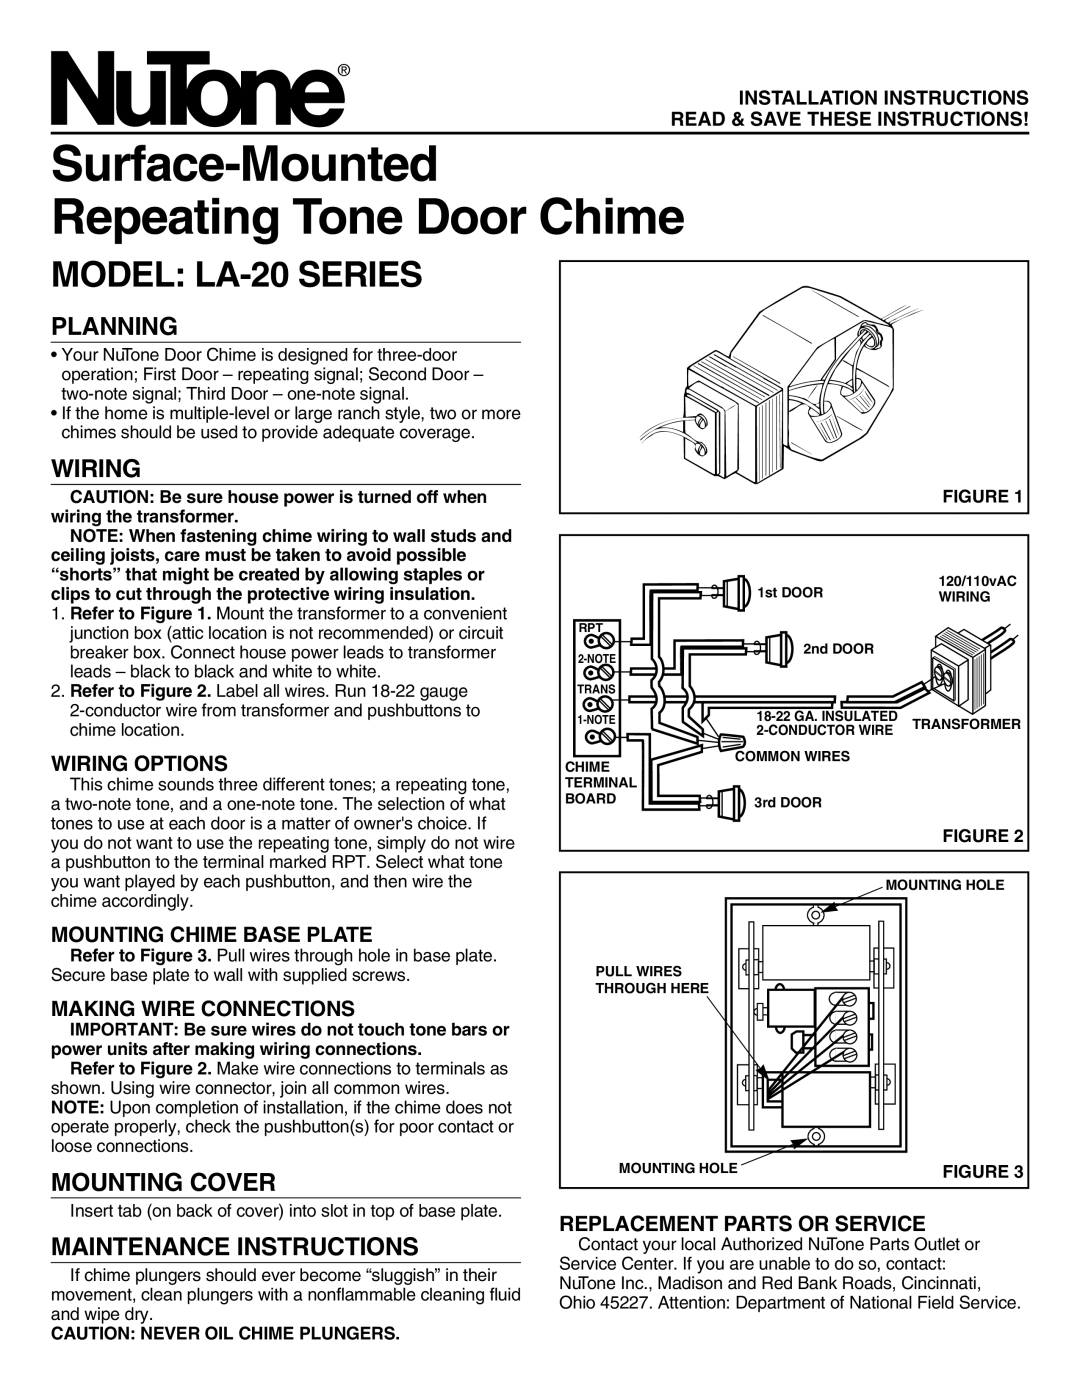 NuTone LA-20 SERIES installation instructions Surface-Mounted Repeating Tone Door Chime, MODEL LA-20SERIES, Planning 